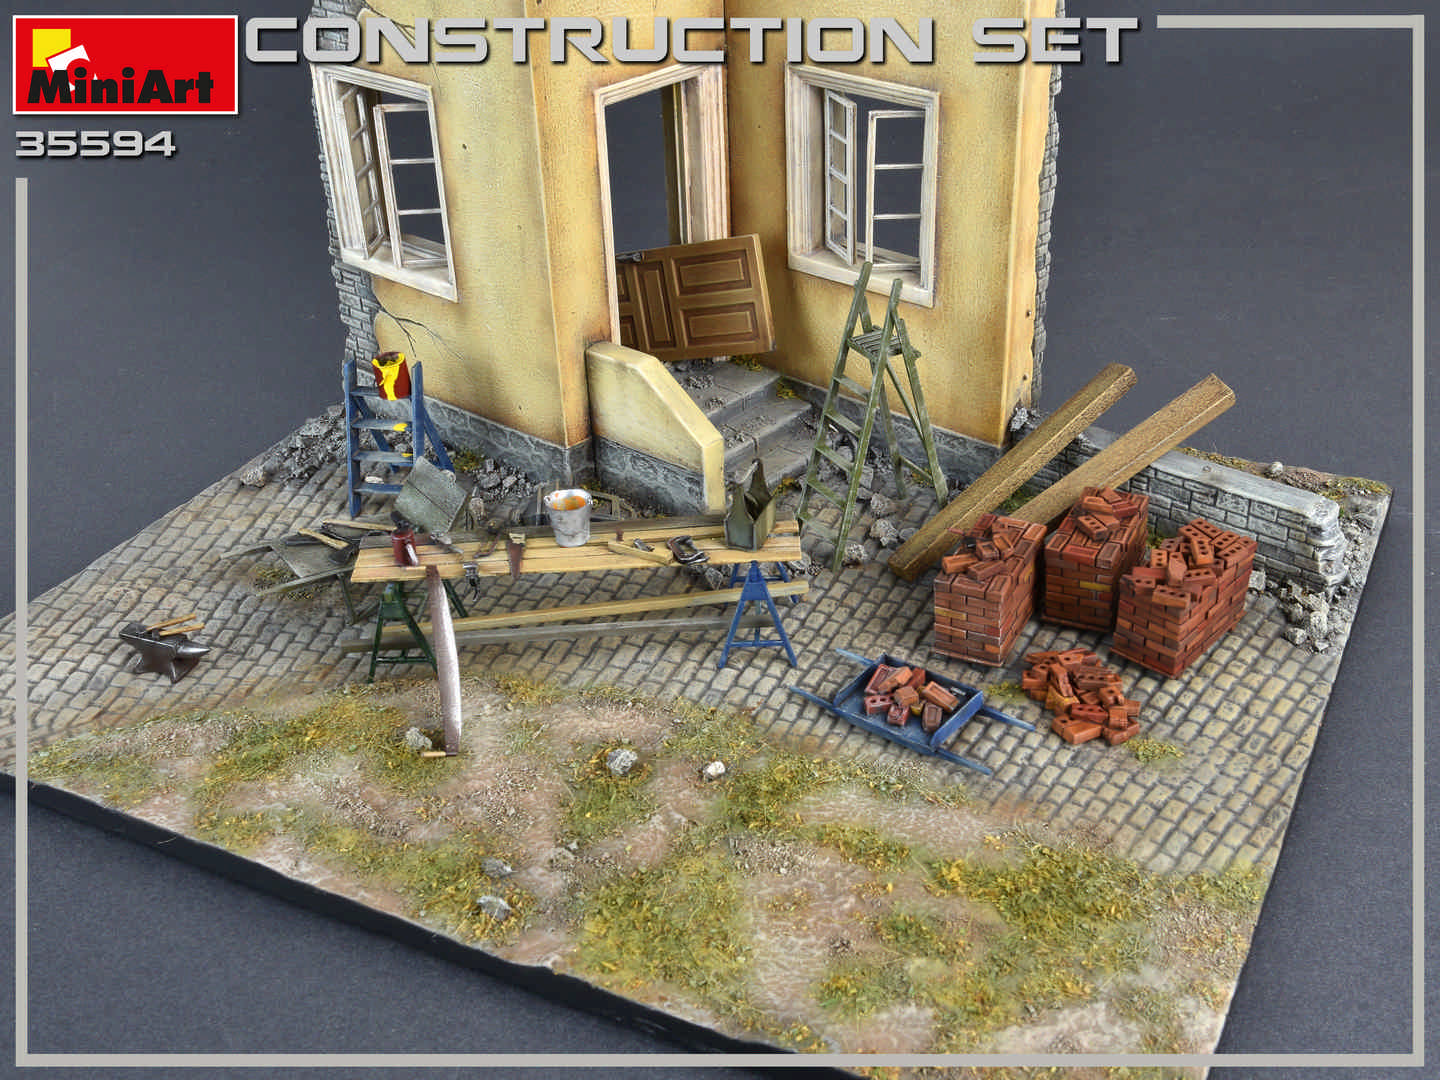 Buildings and Accessories Collection 1/35 Scale Model Kit MiniArt 35594 Construction Set